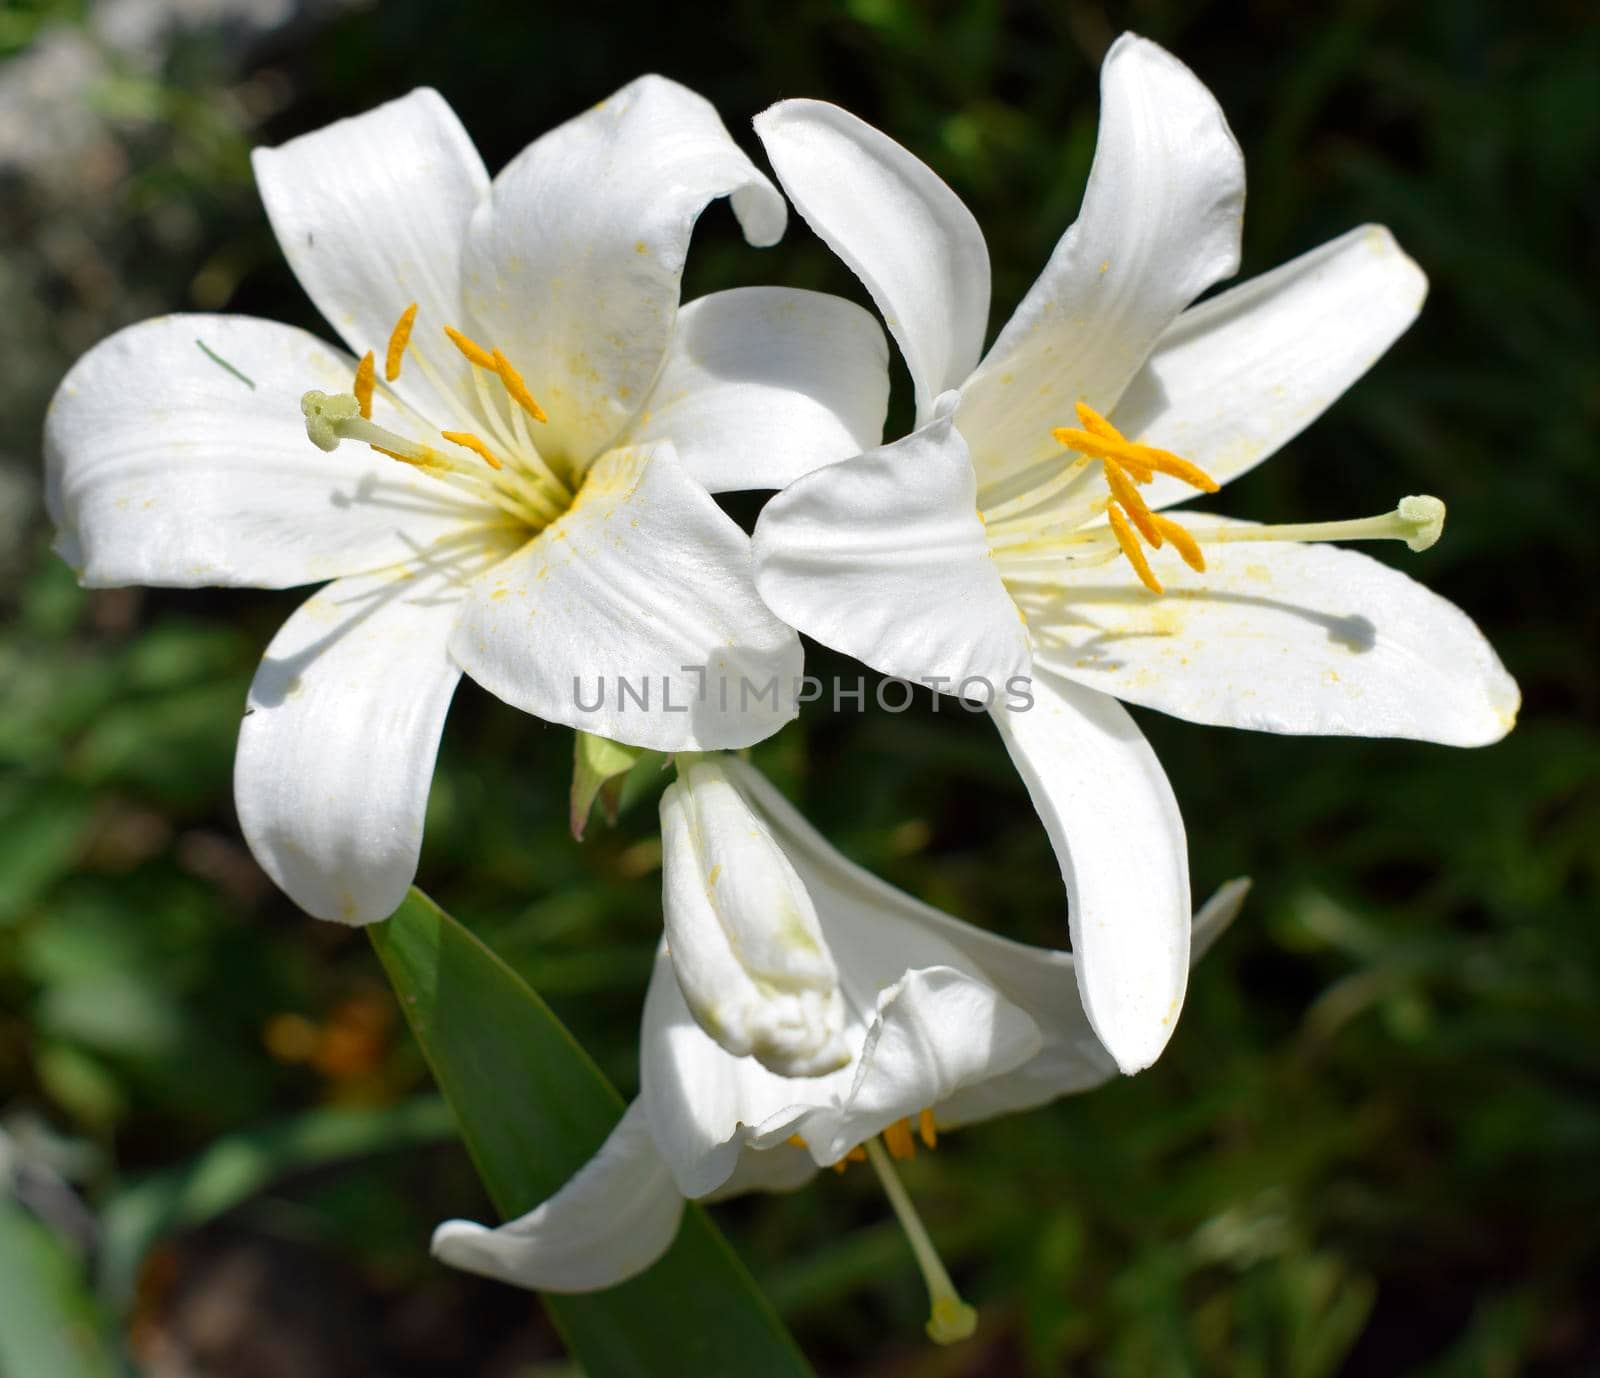 White Asiatic lily flower in the garden. Beautiful nature lily flower blossom closeup petal plant. Green floral bouquet. Shallow depth of field. Selective focus.